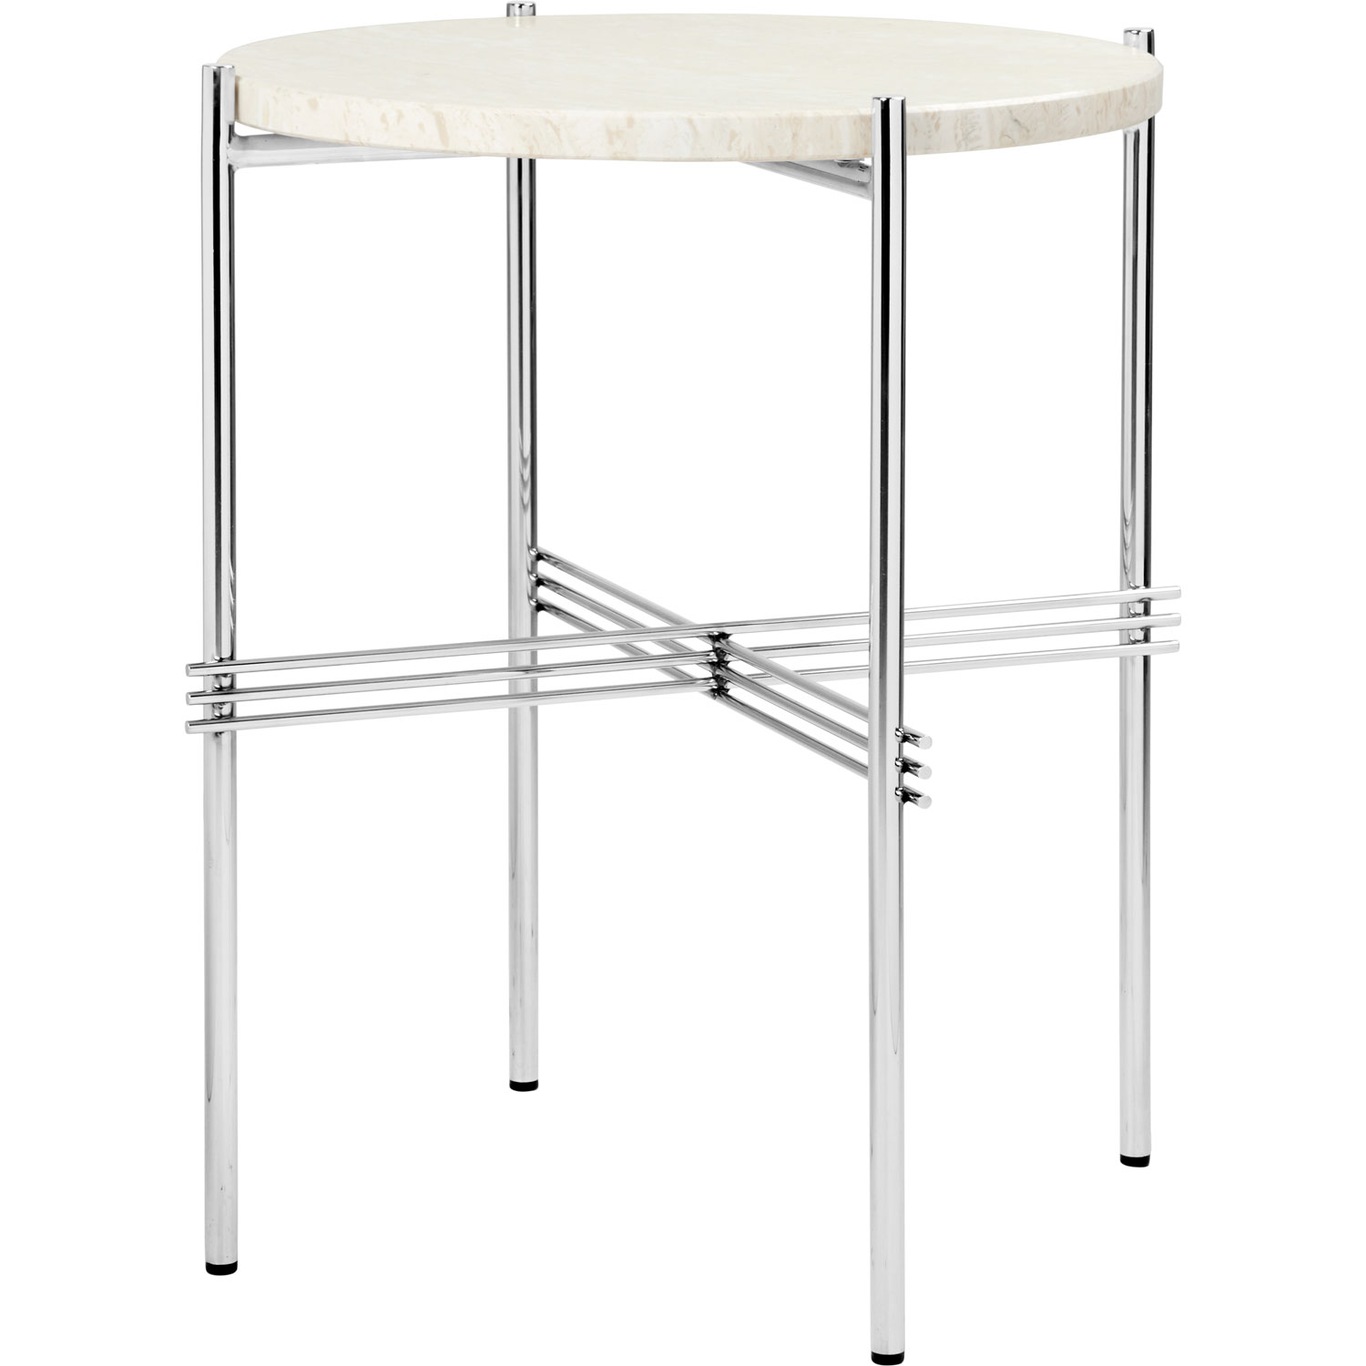 TS Side Table 40 cm, Polished Steel / Neutral white Travertine